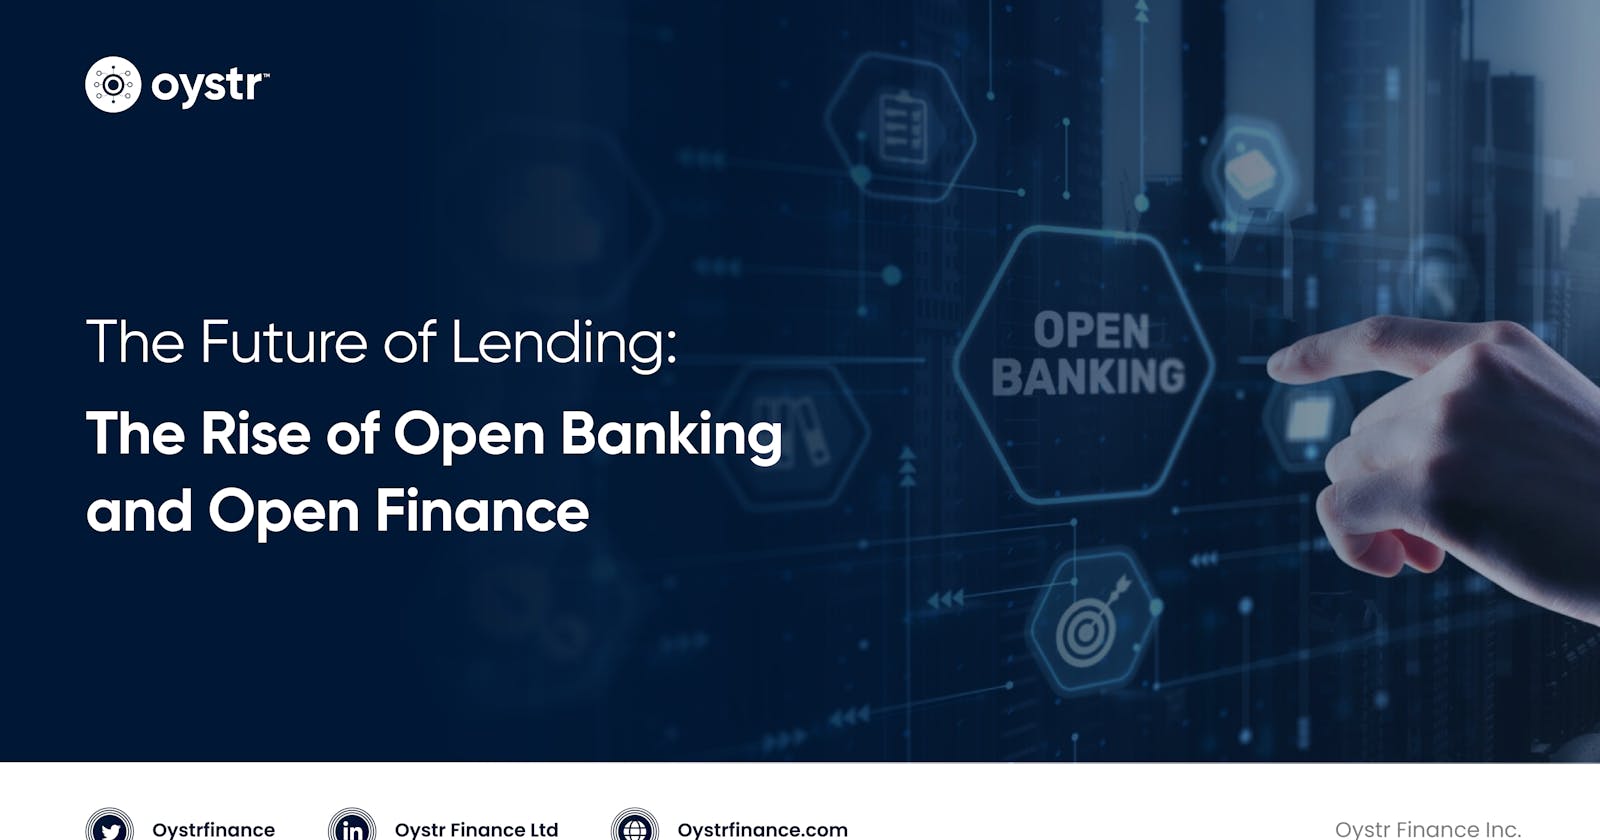 The Rise of Open Banking and Open Finance